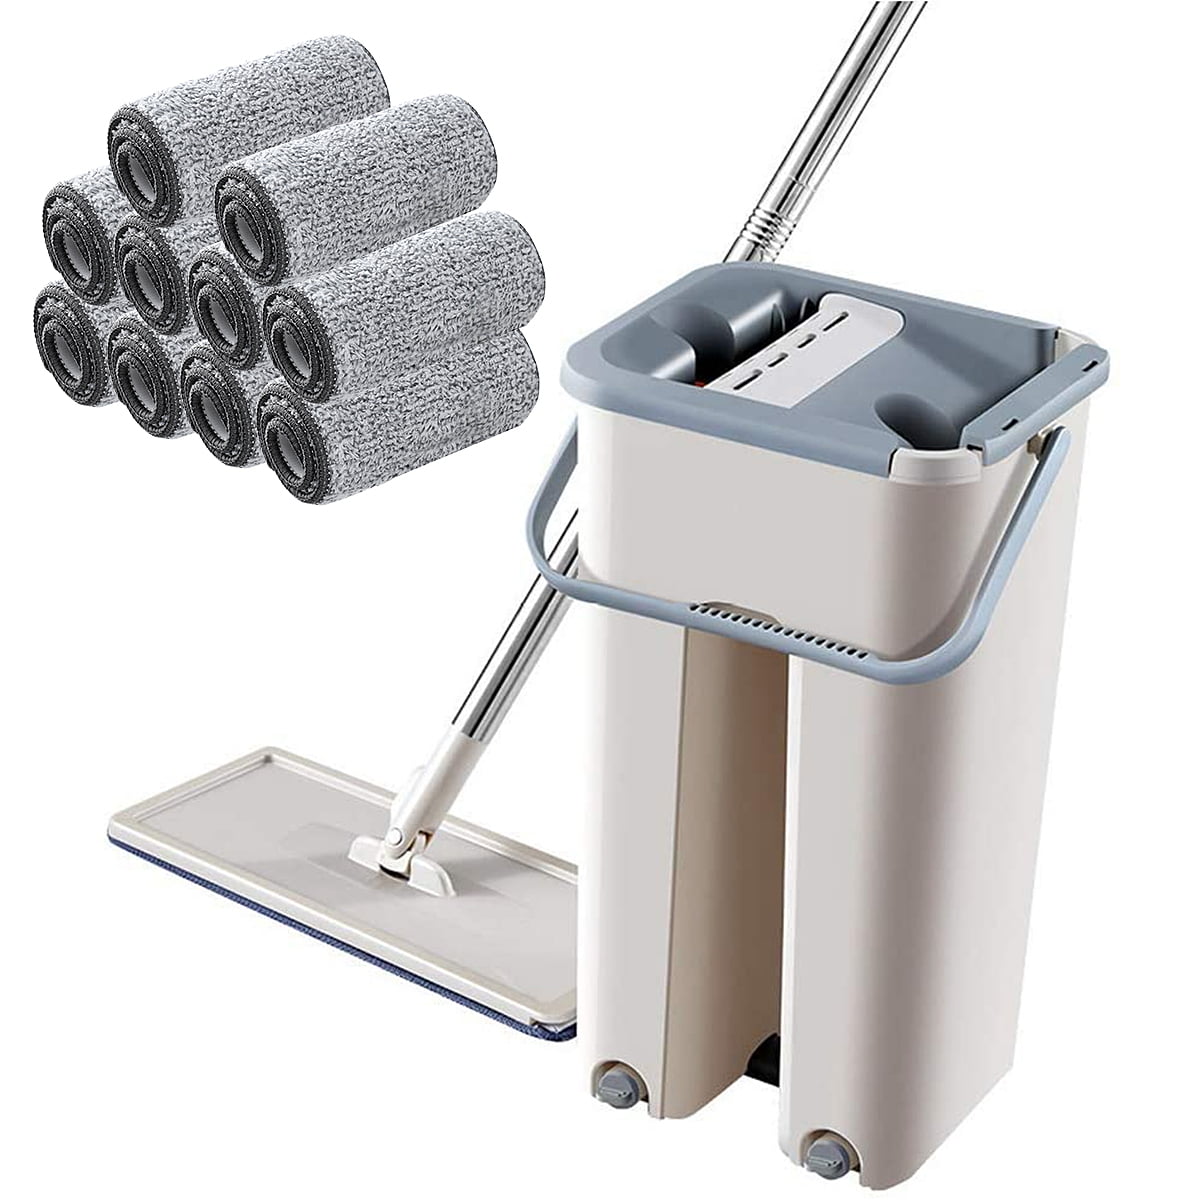 Foldable Flat Mop and Buckets Set with 10 Squeegee Mop Pads, Wash and Dry Flat Mop Cleaning